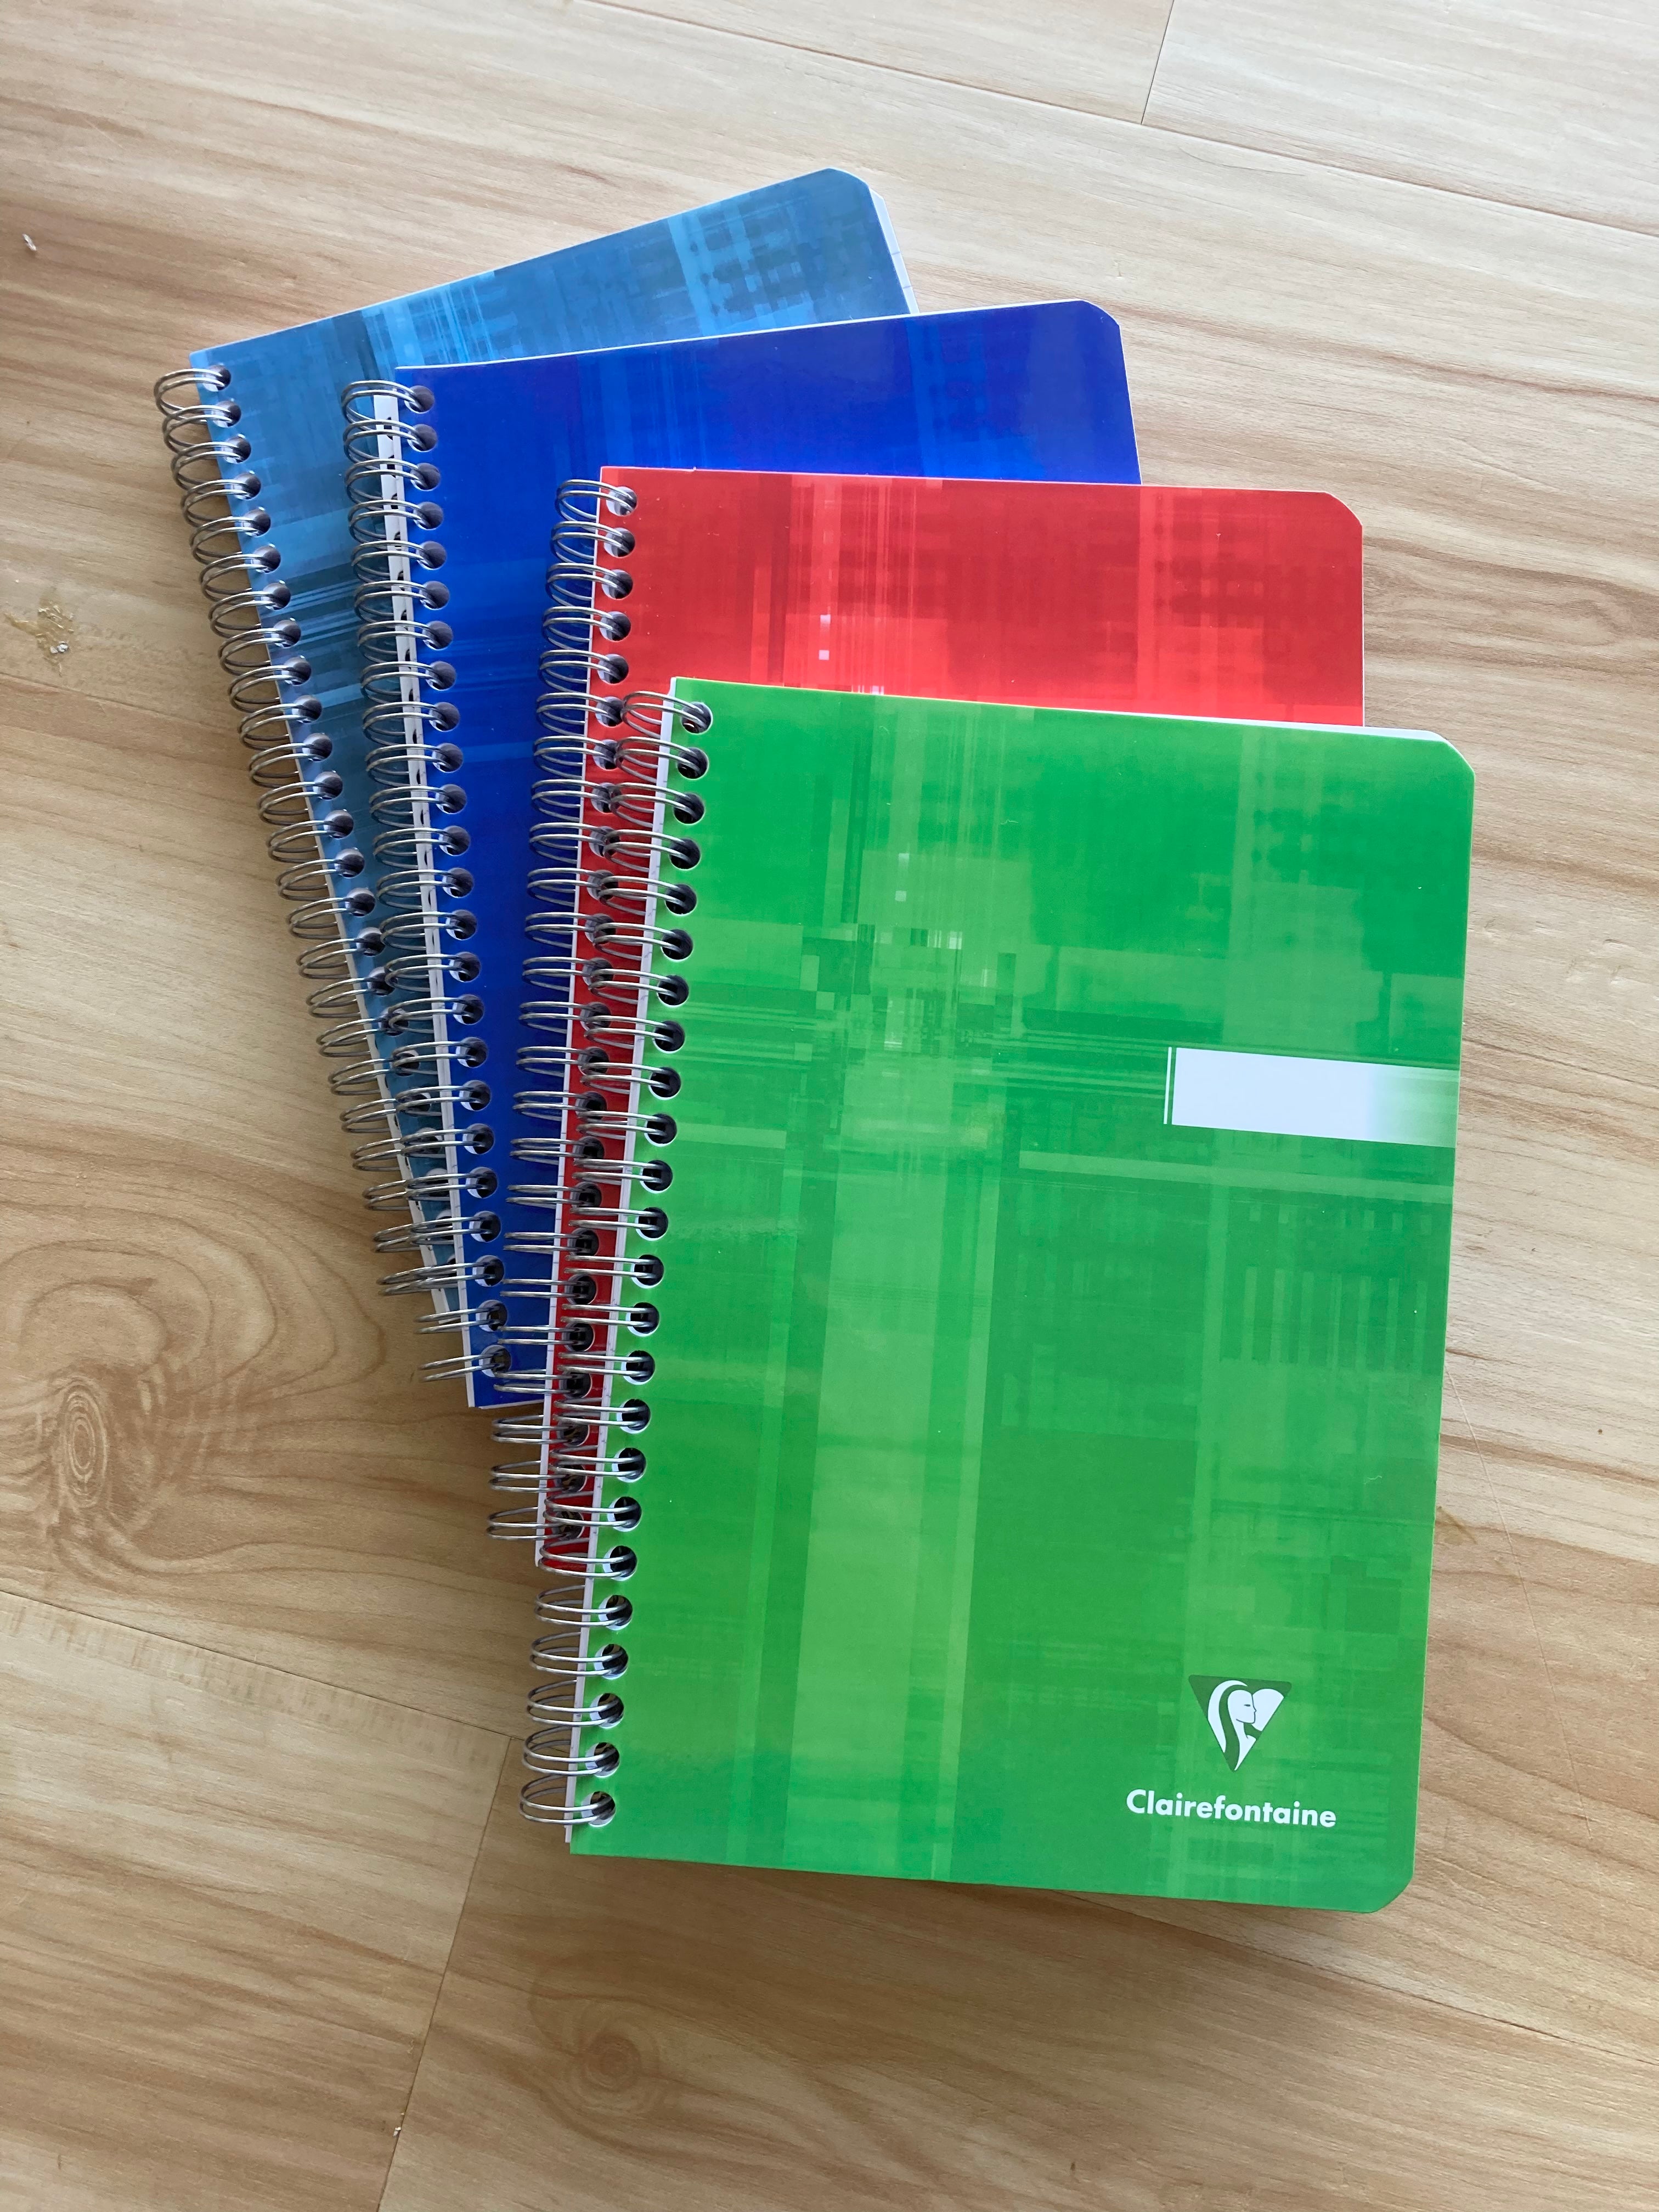 Clairefontaine Notebooks